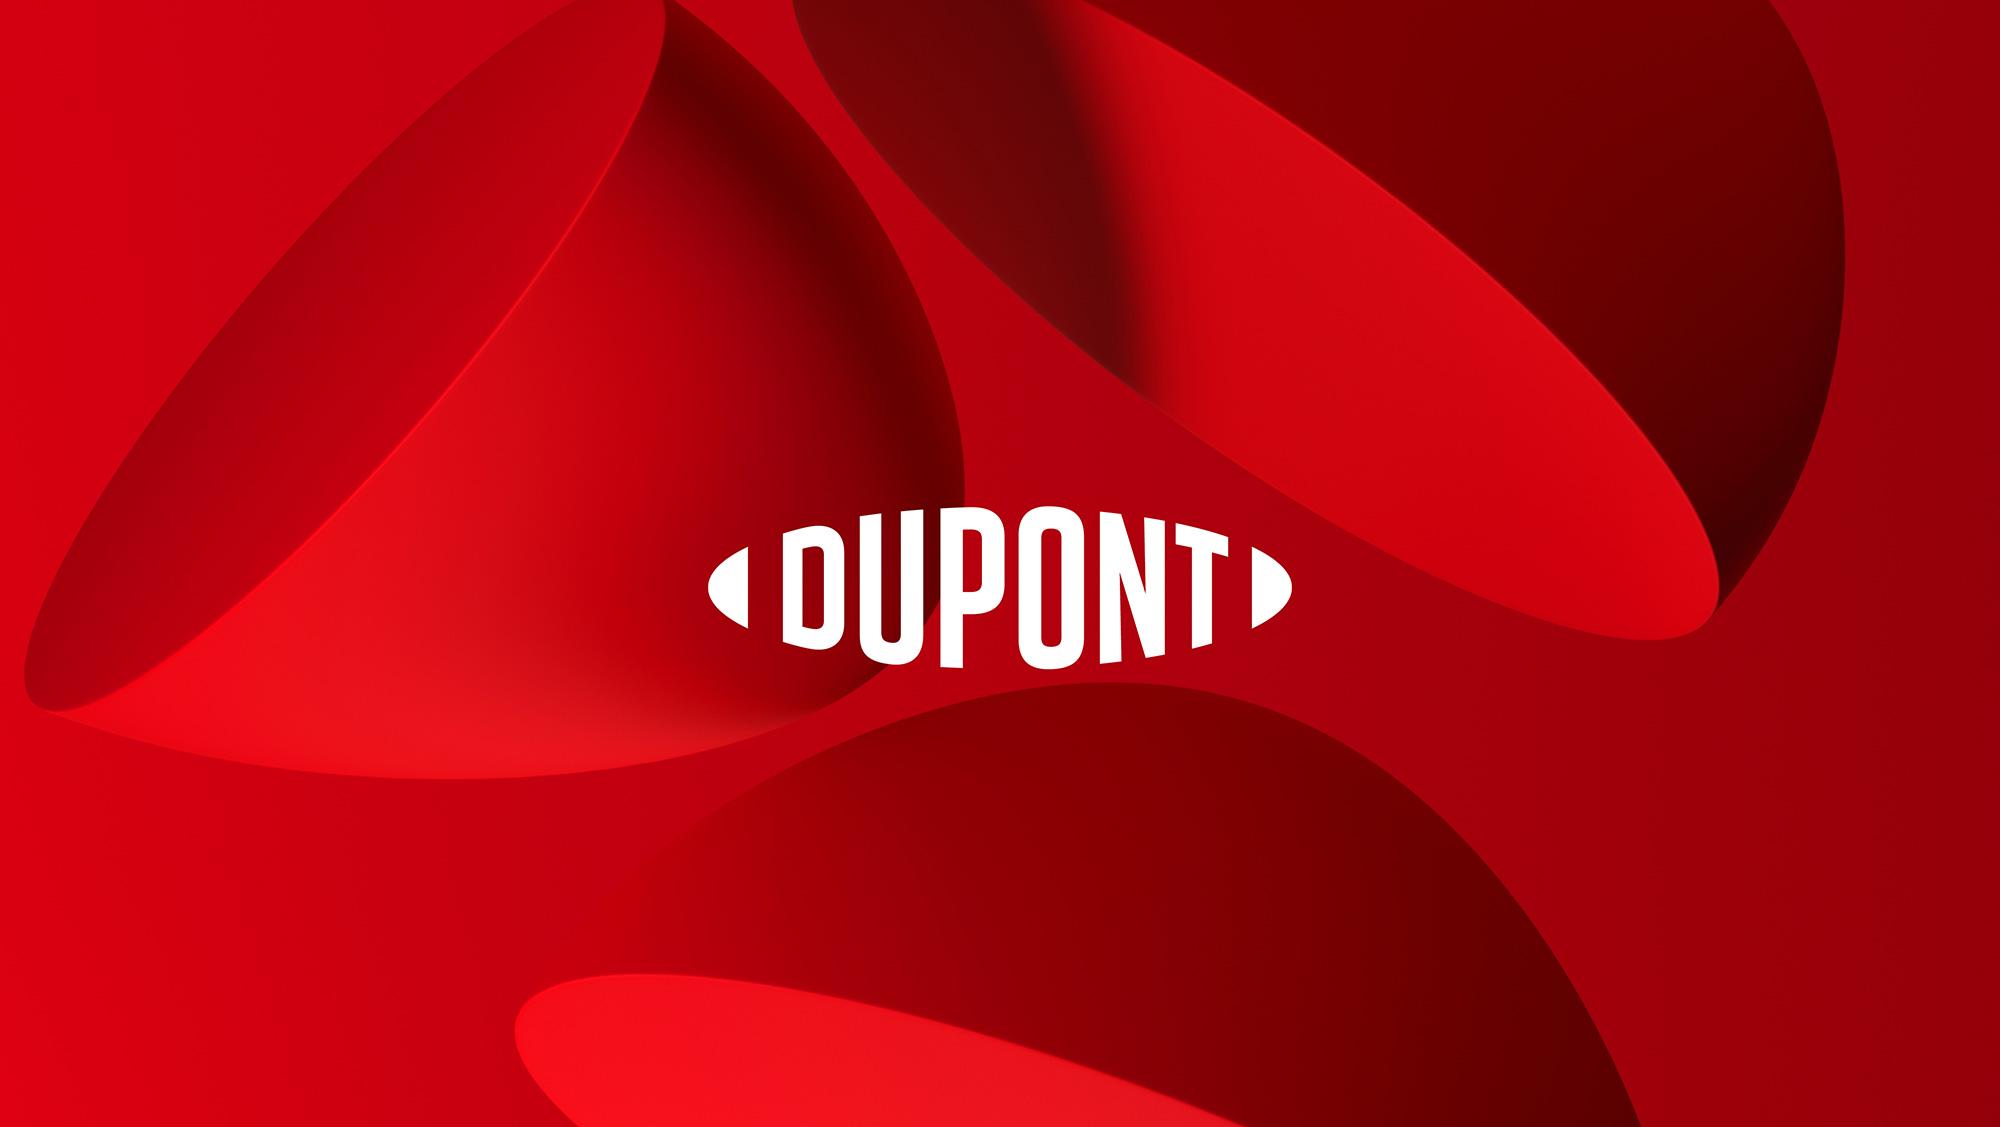 Dupont Logo - Brand New: New Logo and Identity for DuPont